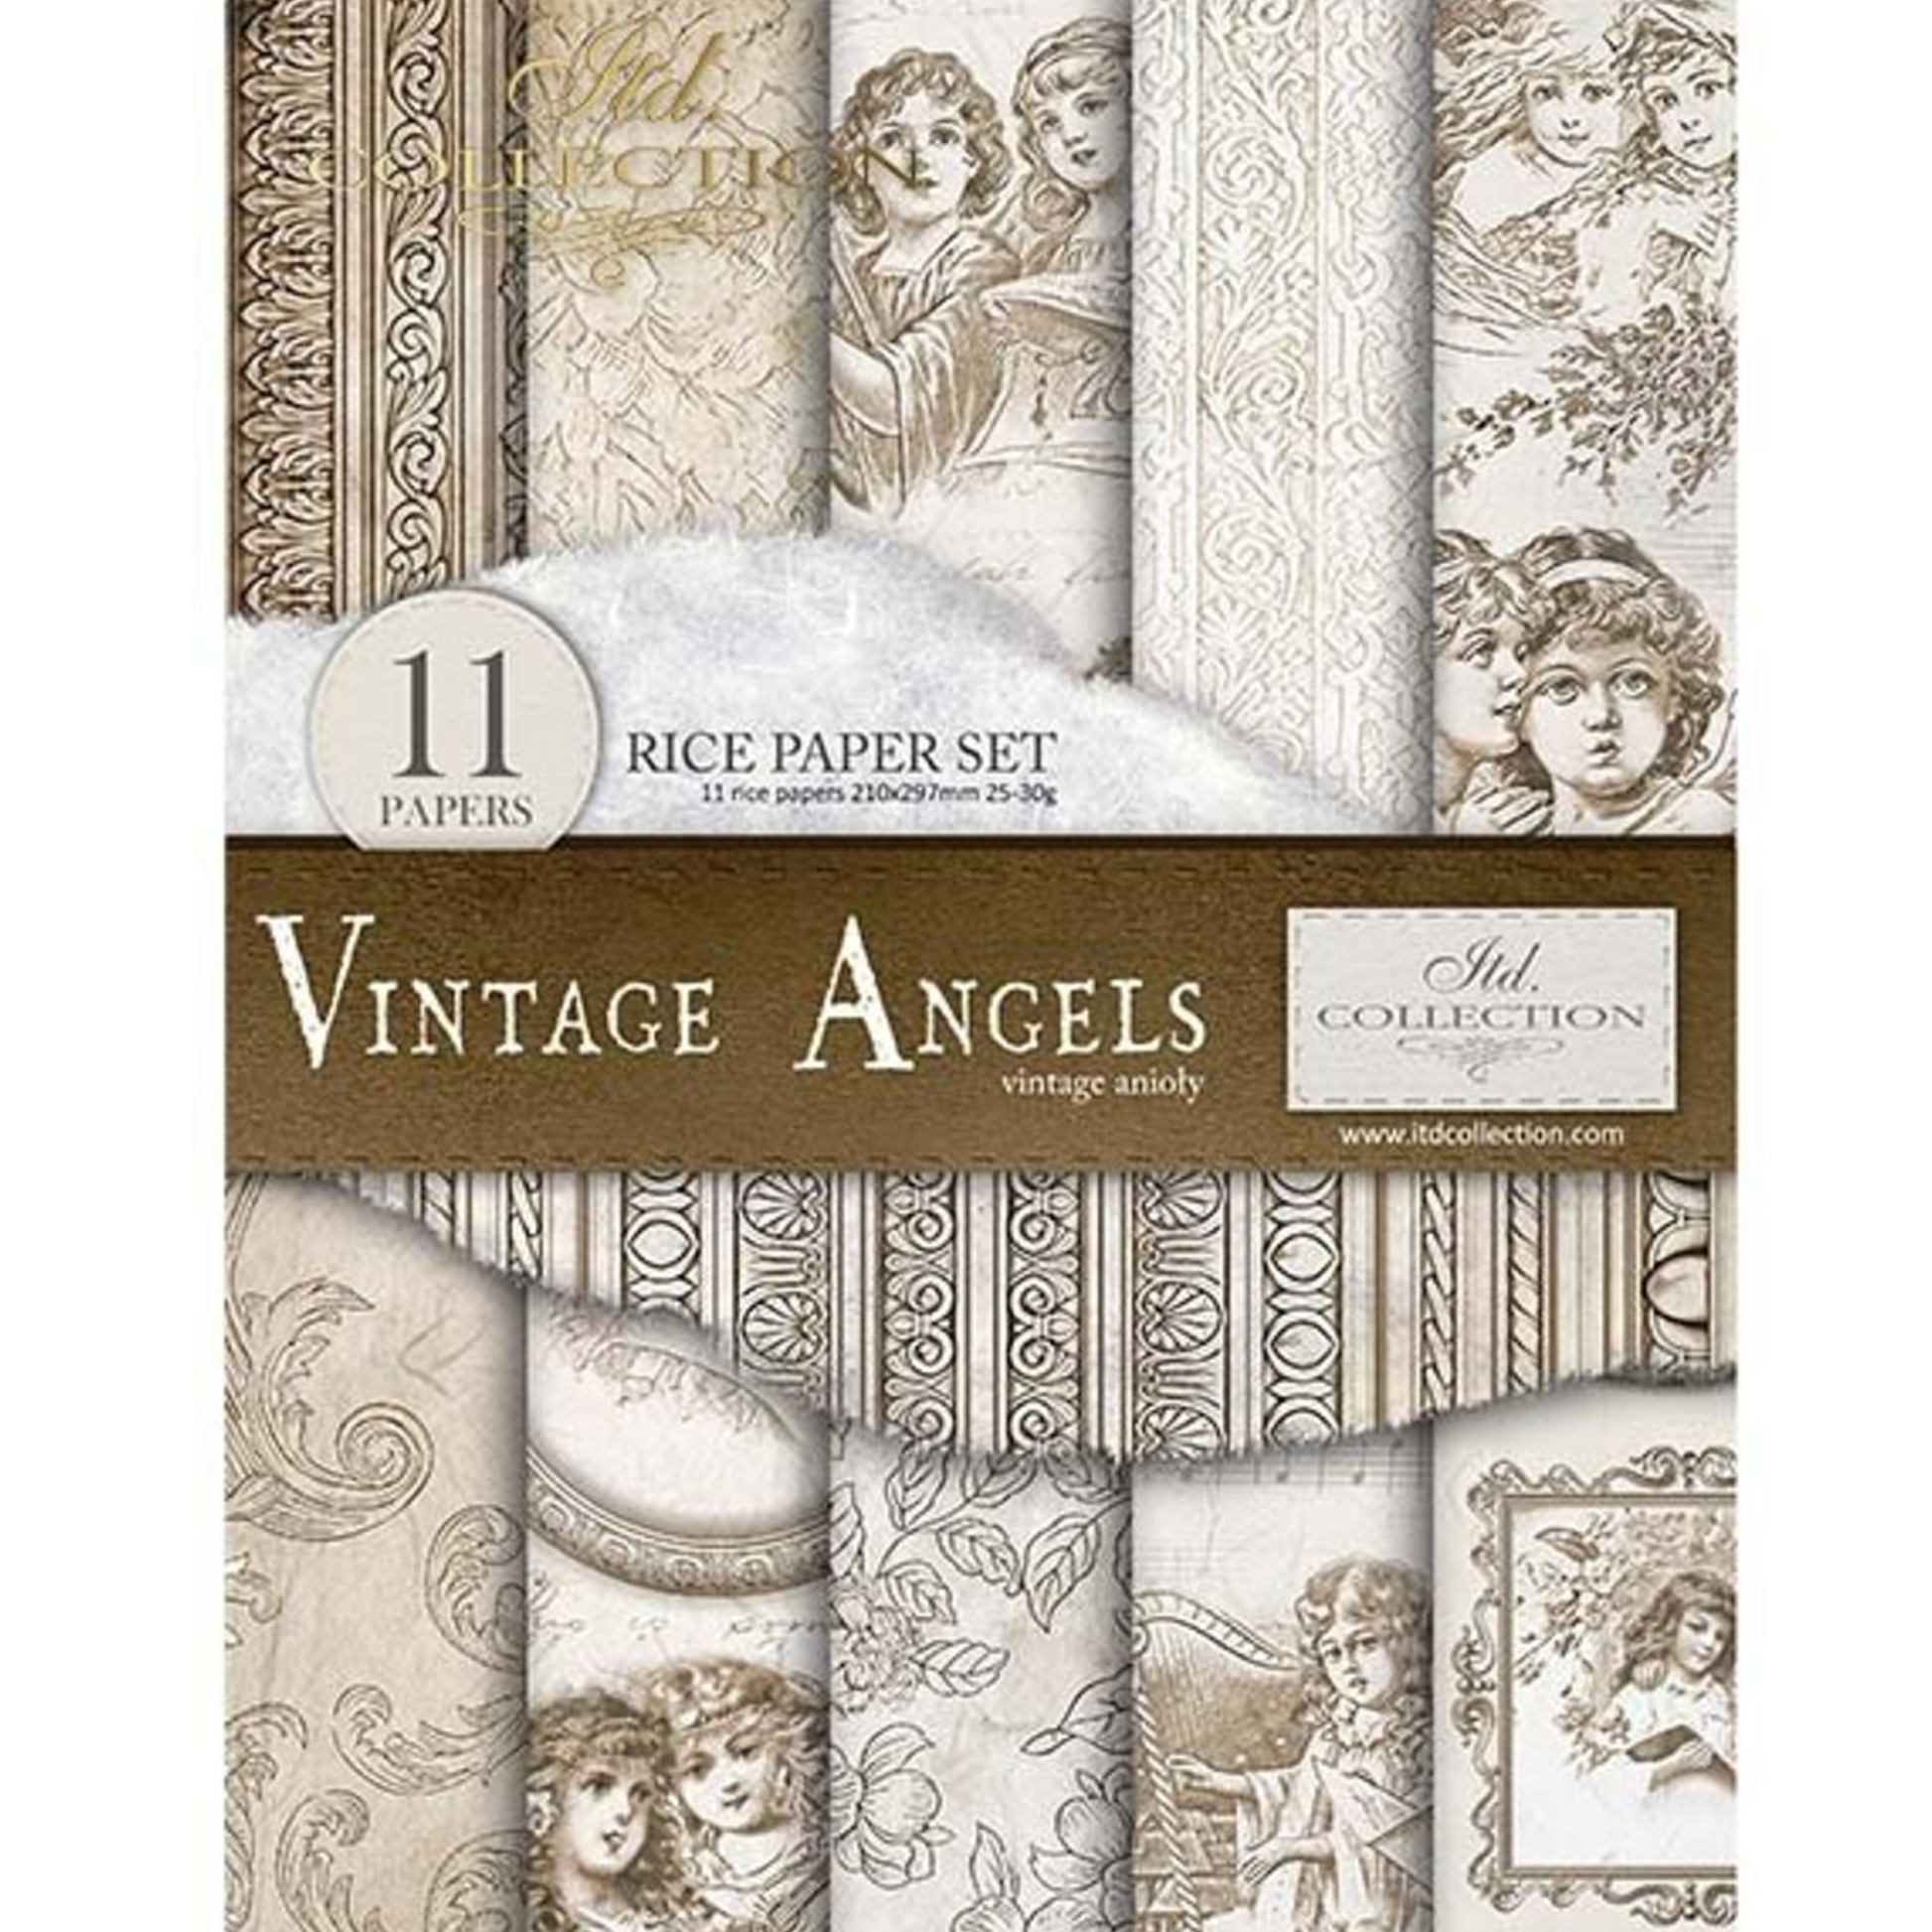 Vintage Angels - decoupage rice paper 11 sheet set from ITD Collection in size A4. Available at Milton's Daughter. Front cover.